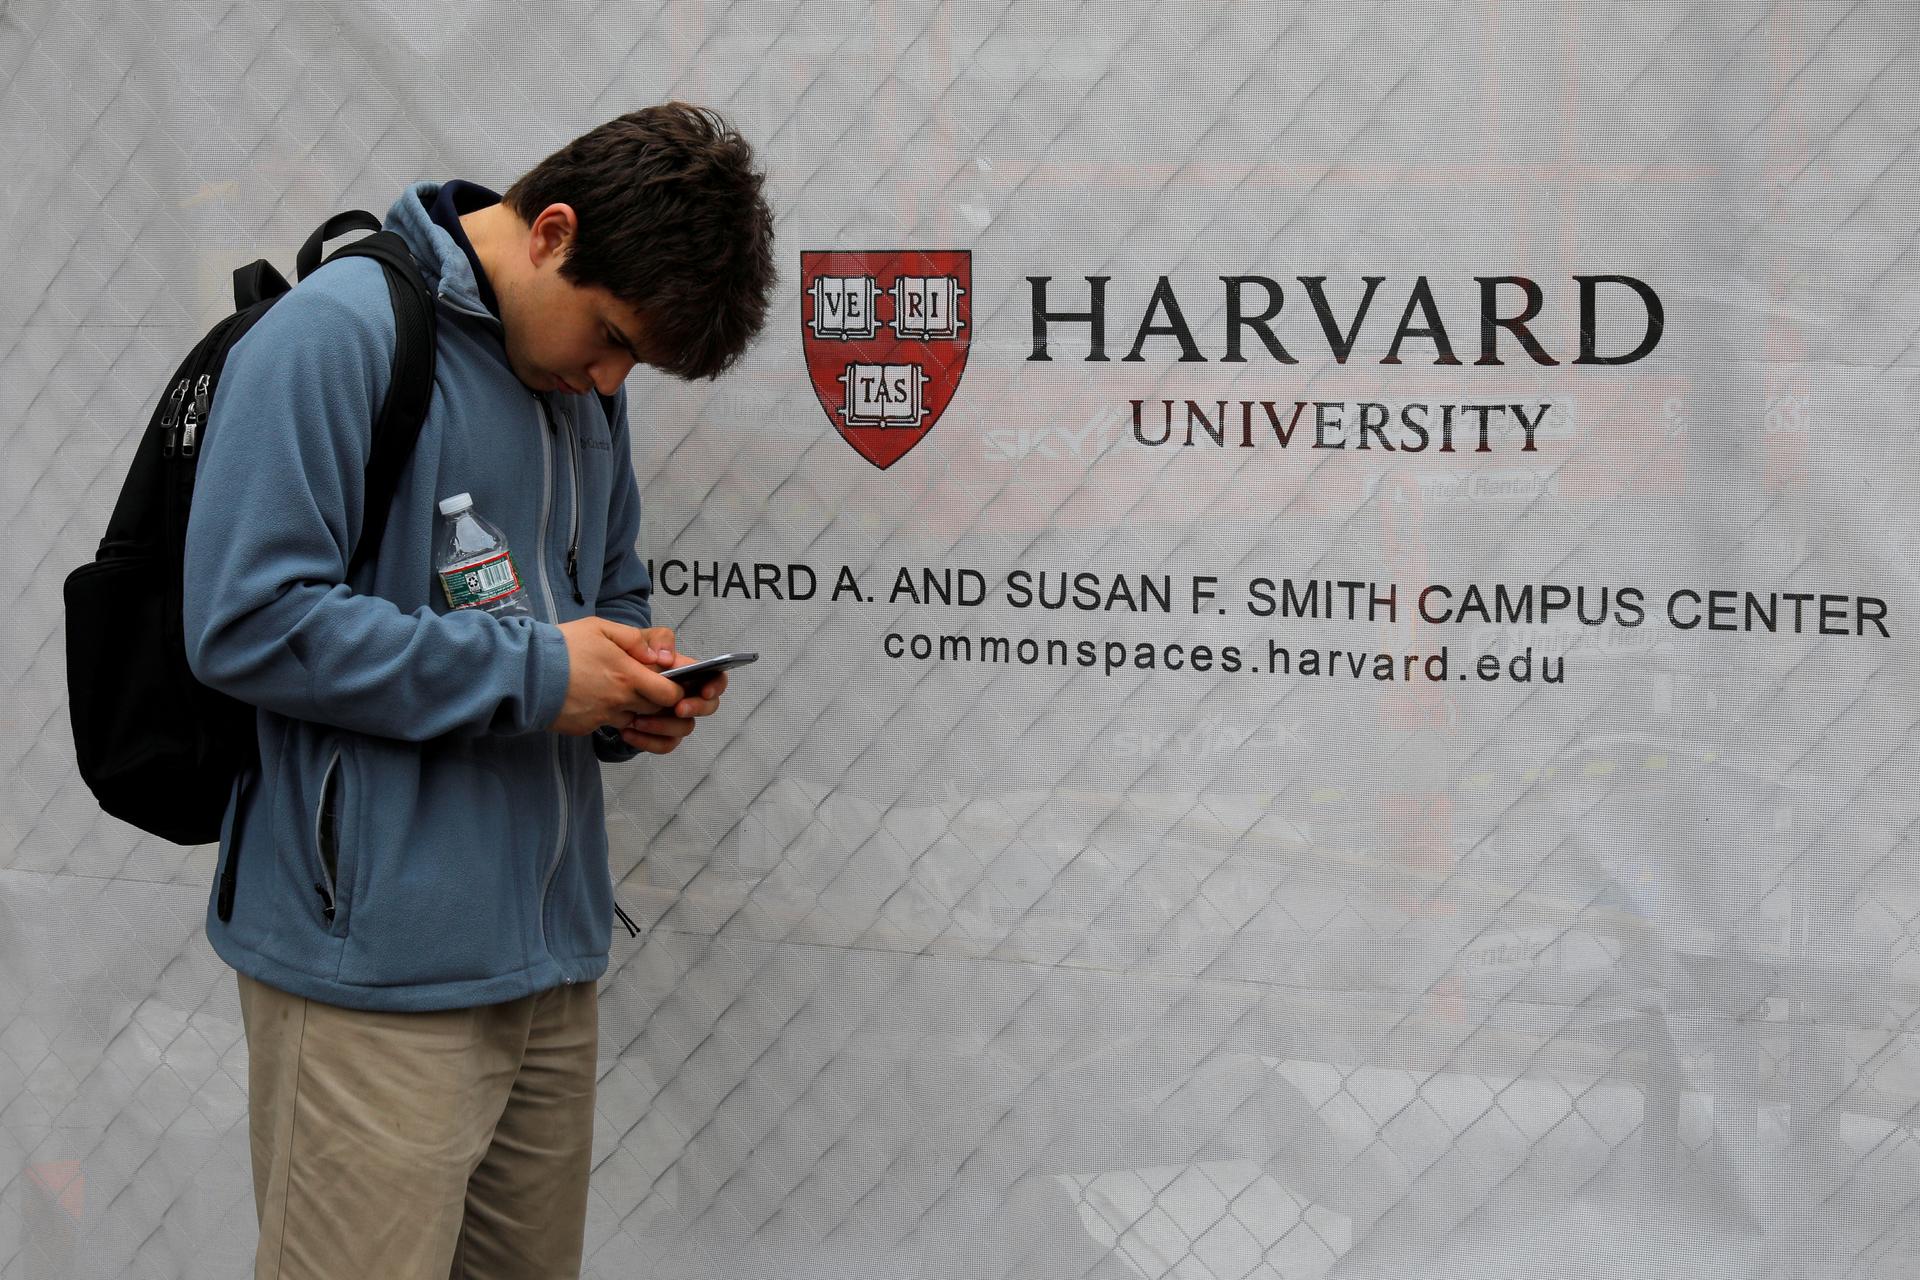 man in front of Harvard University sign looks at phone